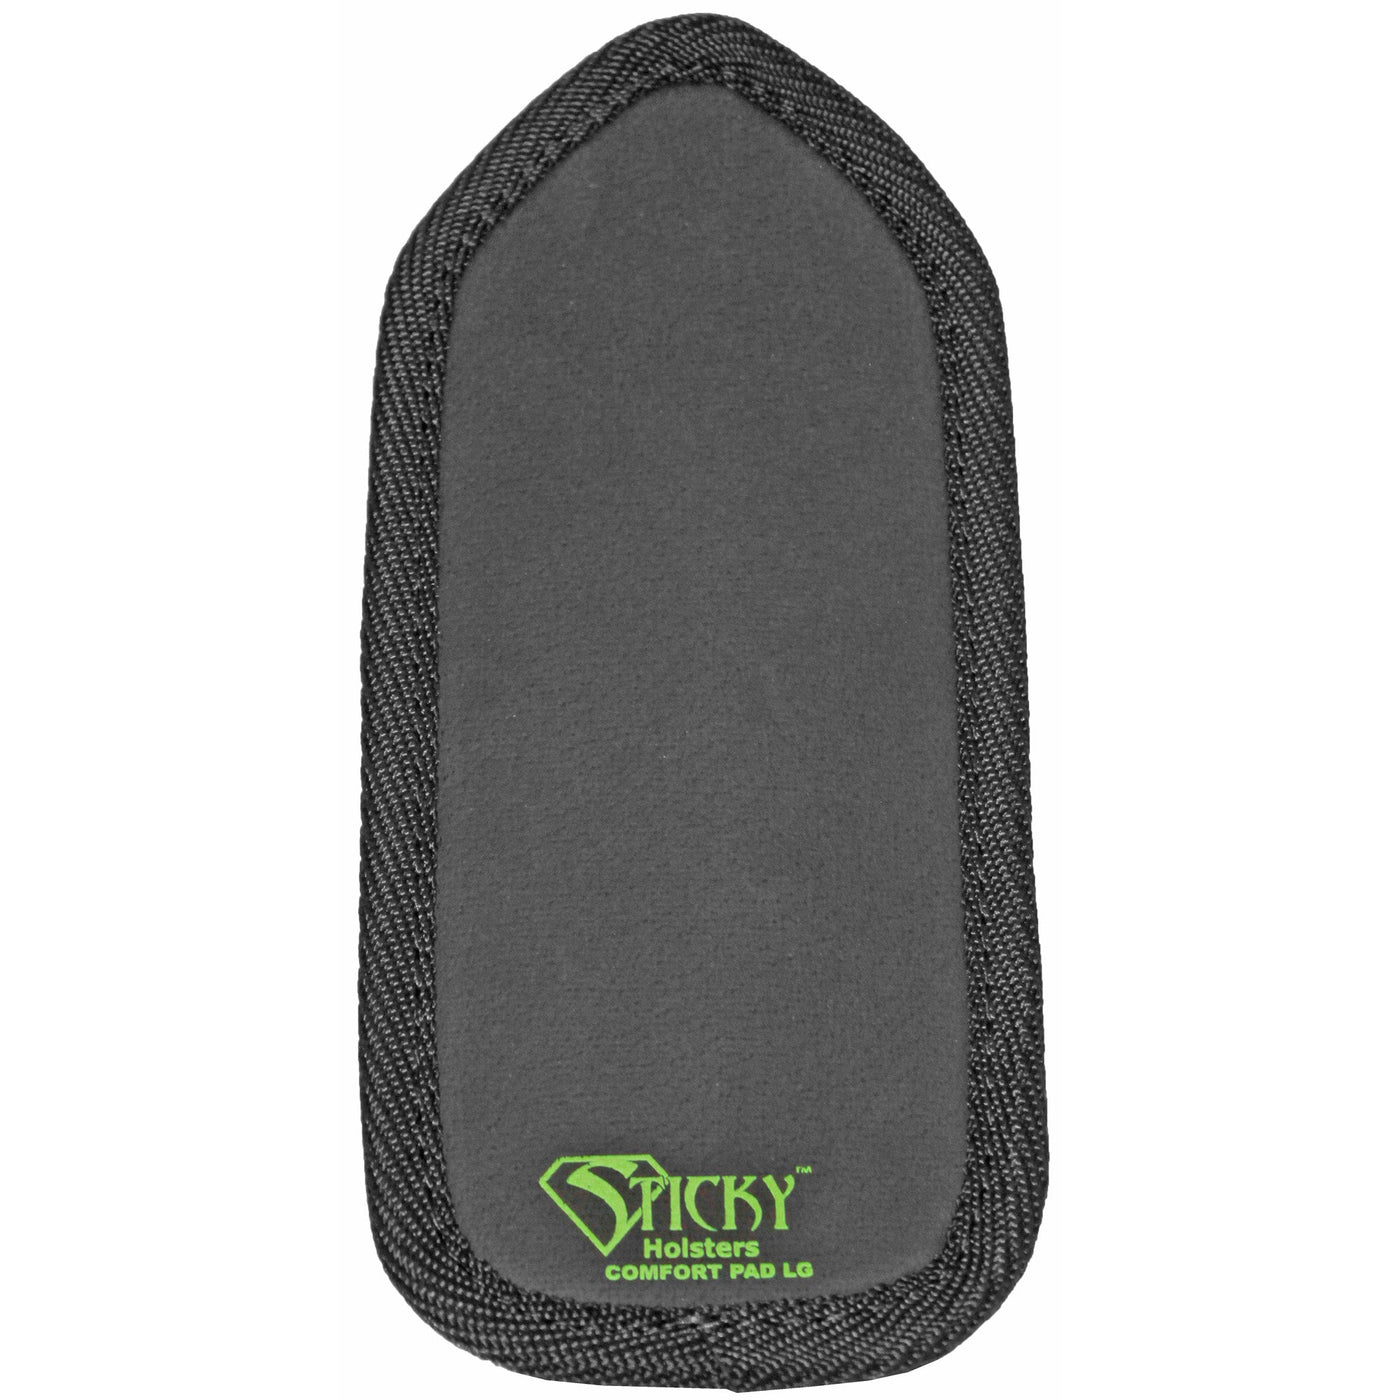 Sticky Holsters Sticky Comfort Pad Large Holsters